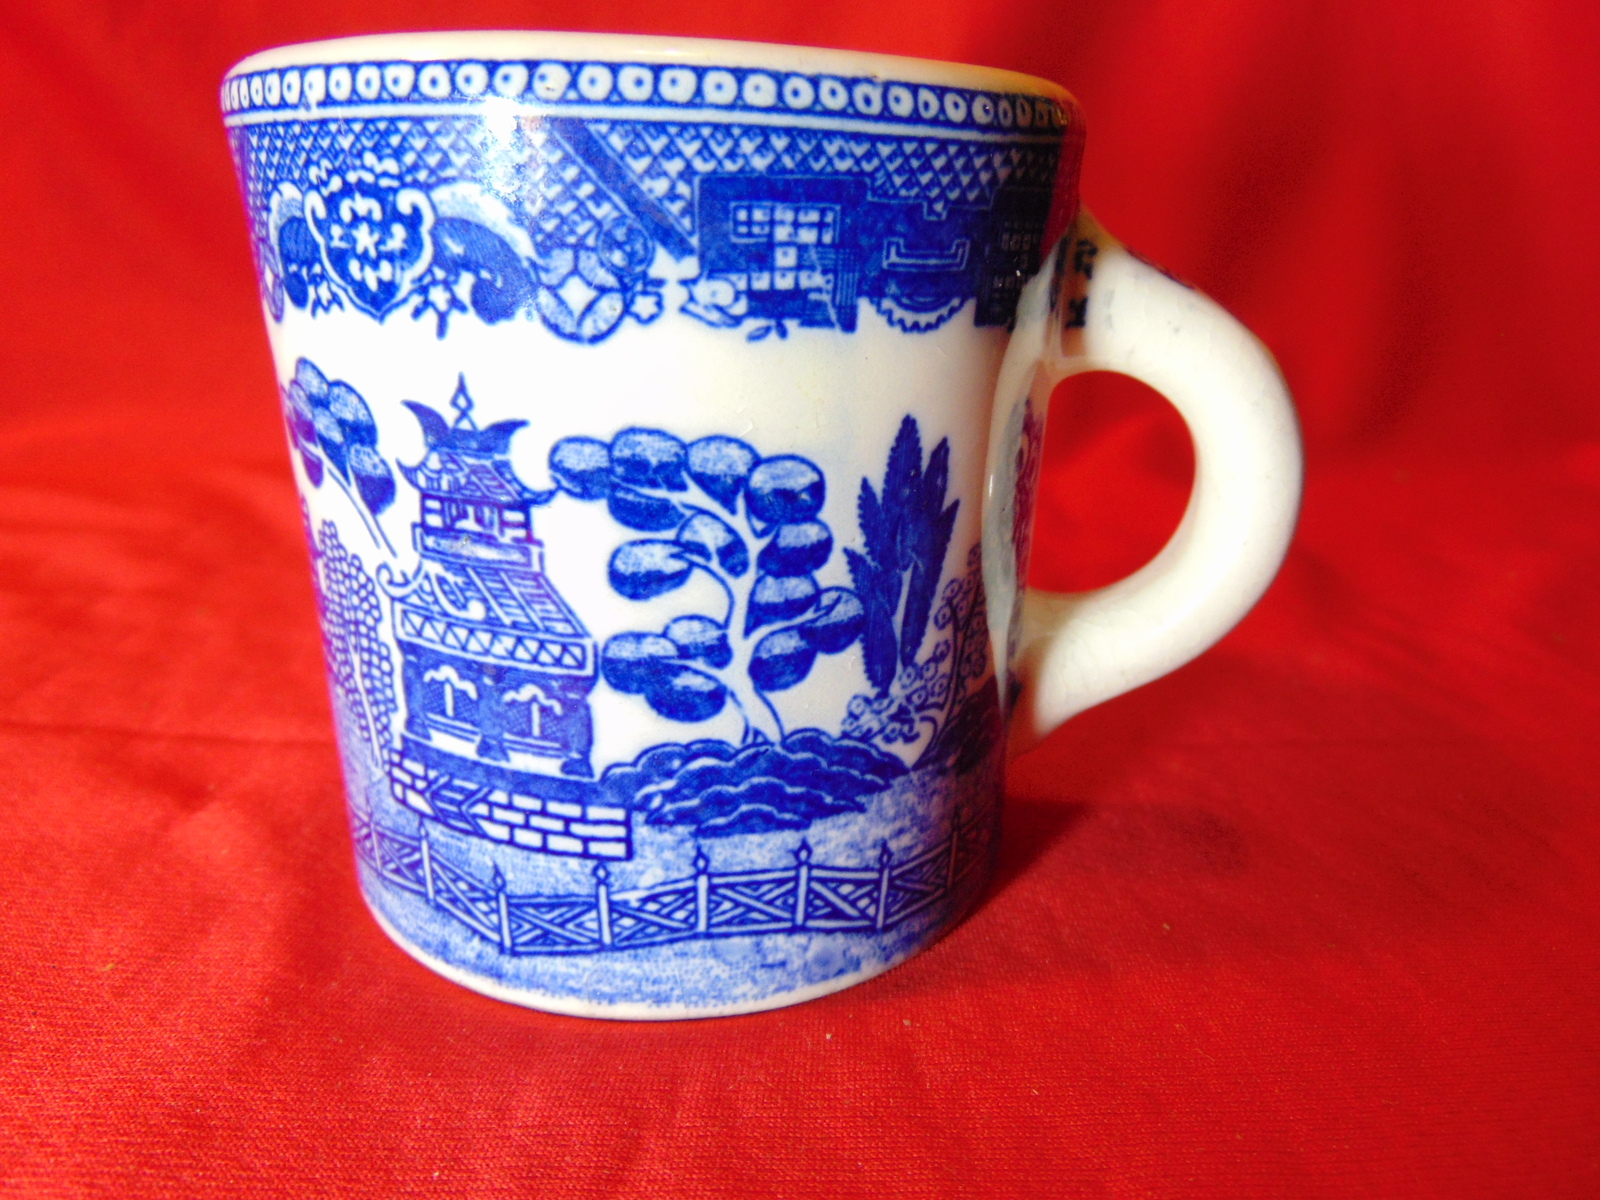 Primary image for 3 3/8", Restaurant Ware, Blue Willow Coffee Mug, from NASCO, Japan.